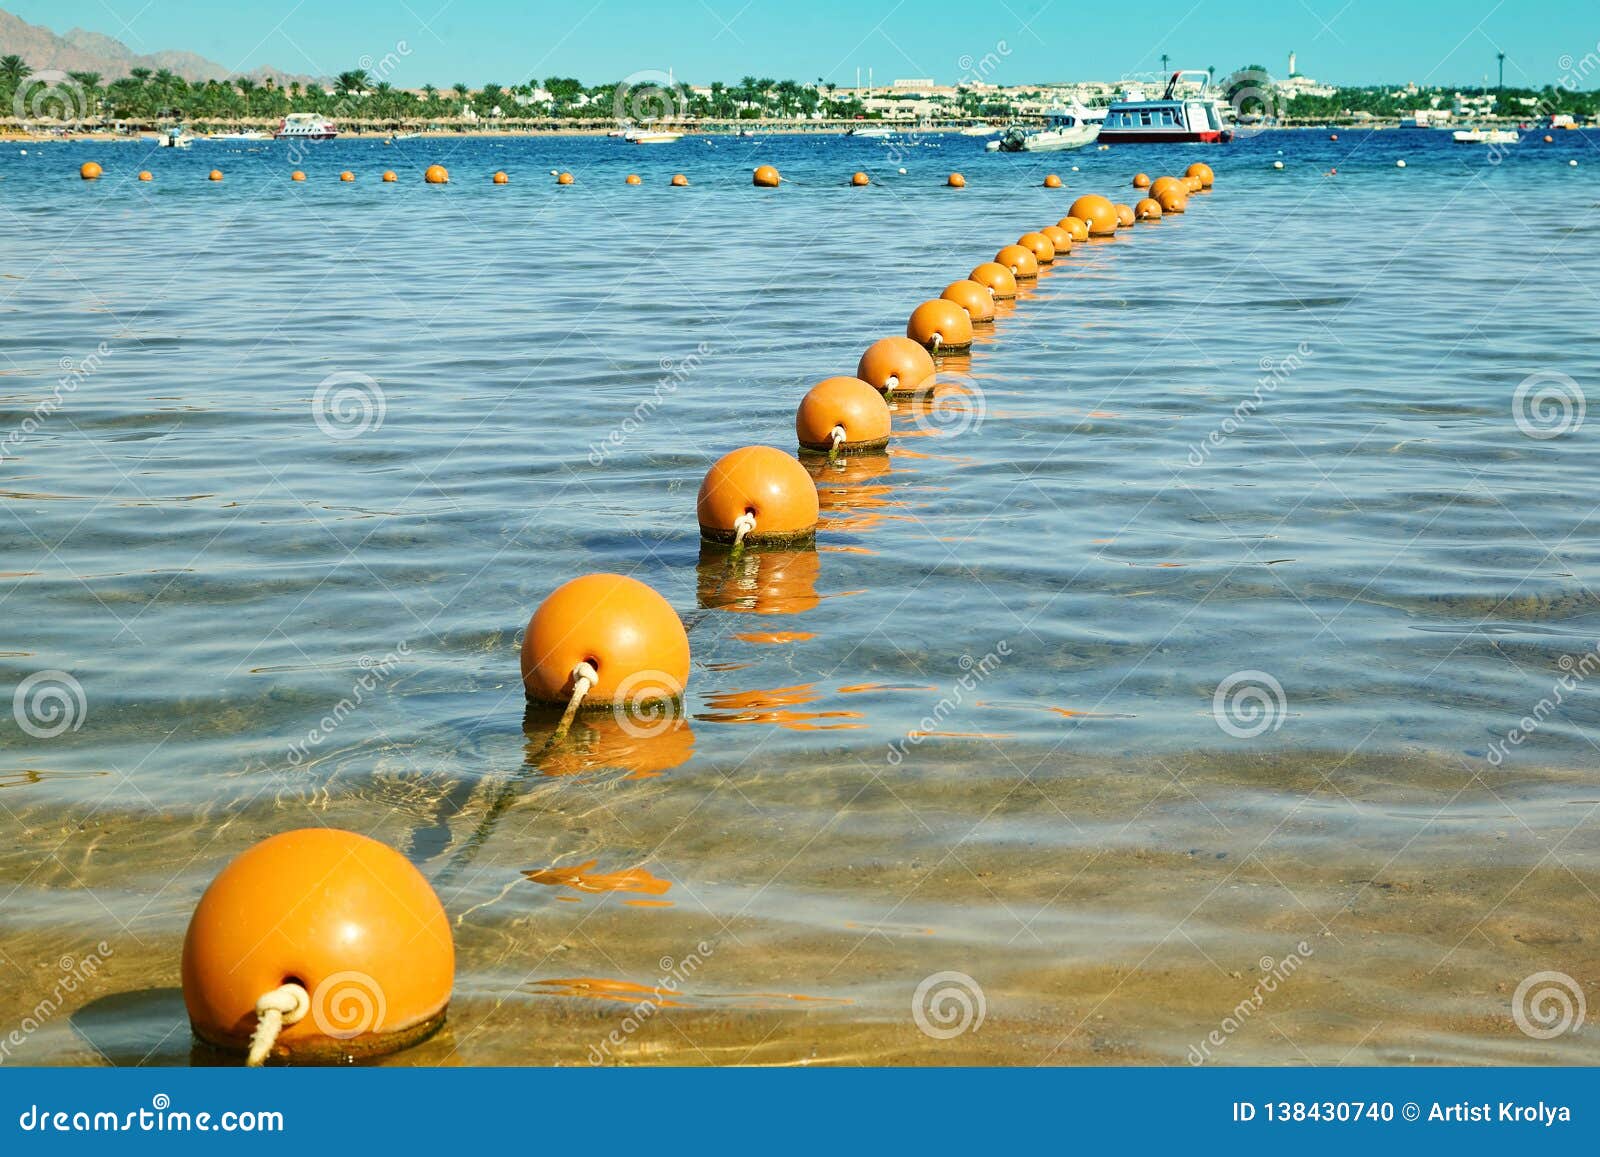 View of the Sea from a Shore with a Long Line of Orange Colored